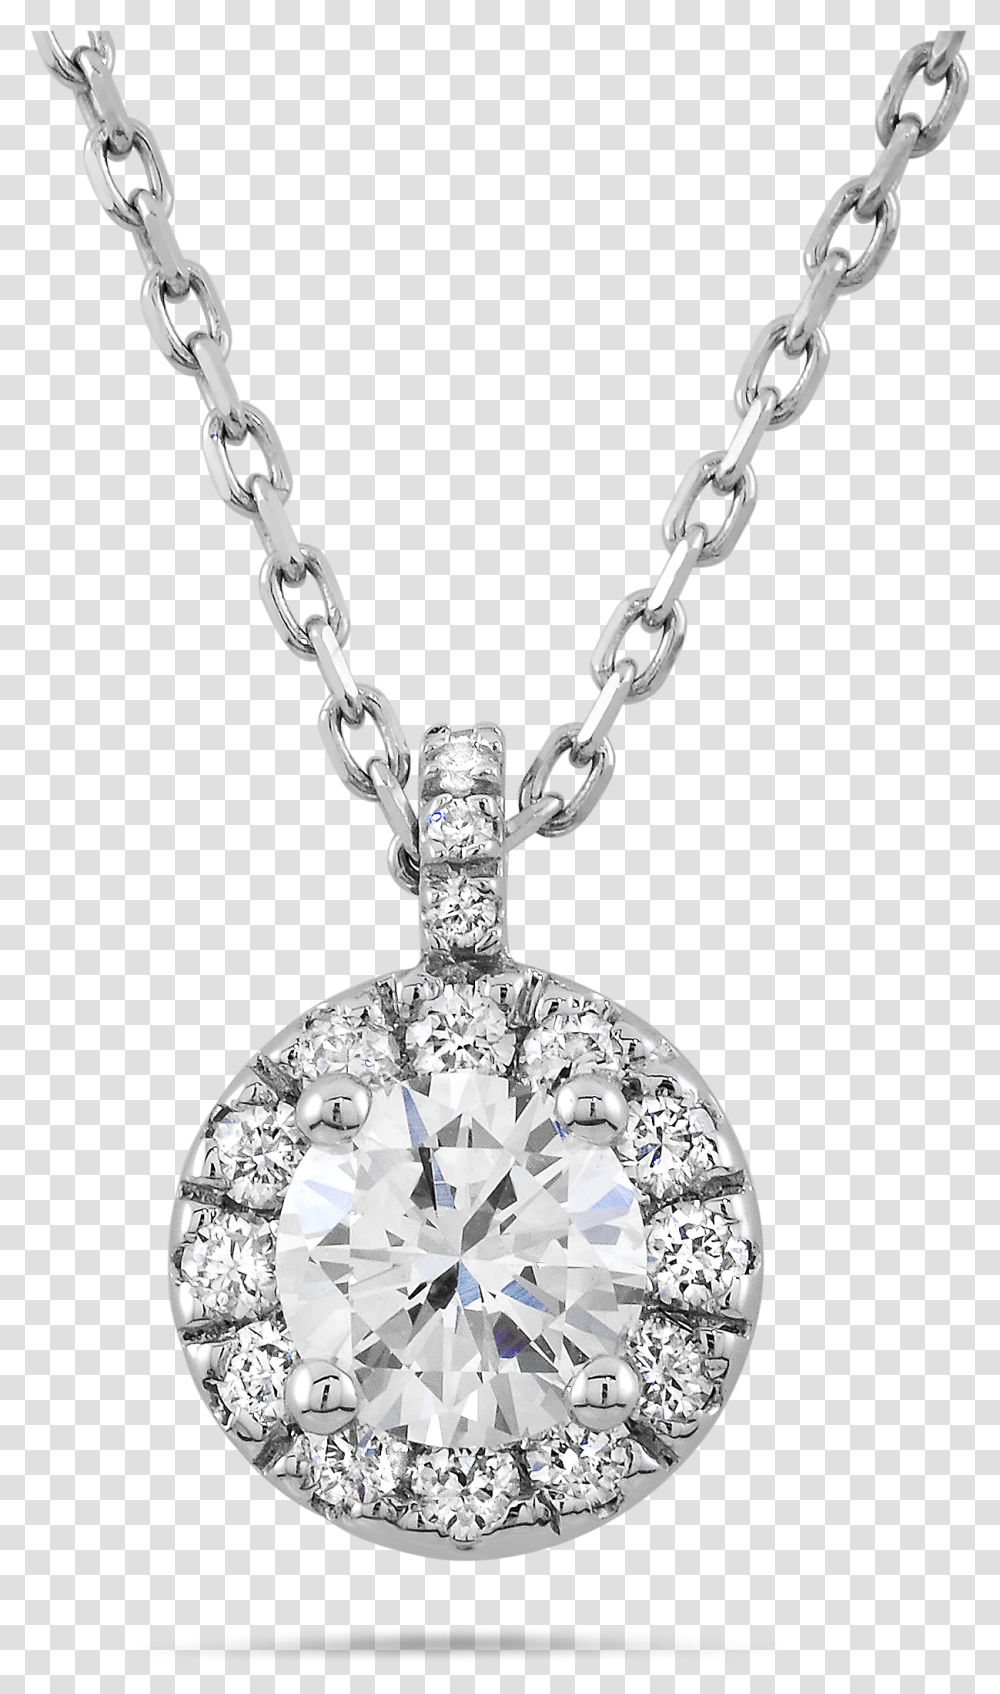 Collection Of Diamond Necklace Clipart White Gold Diamond Teardrop Necklace, Jewelry, Accessories, Accessory, Pendant Transparent Png